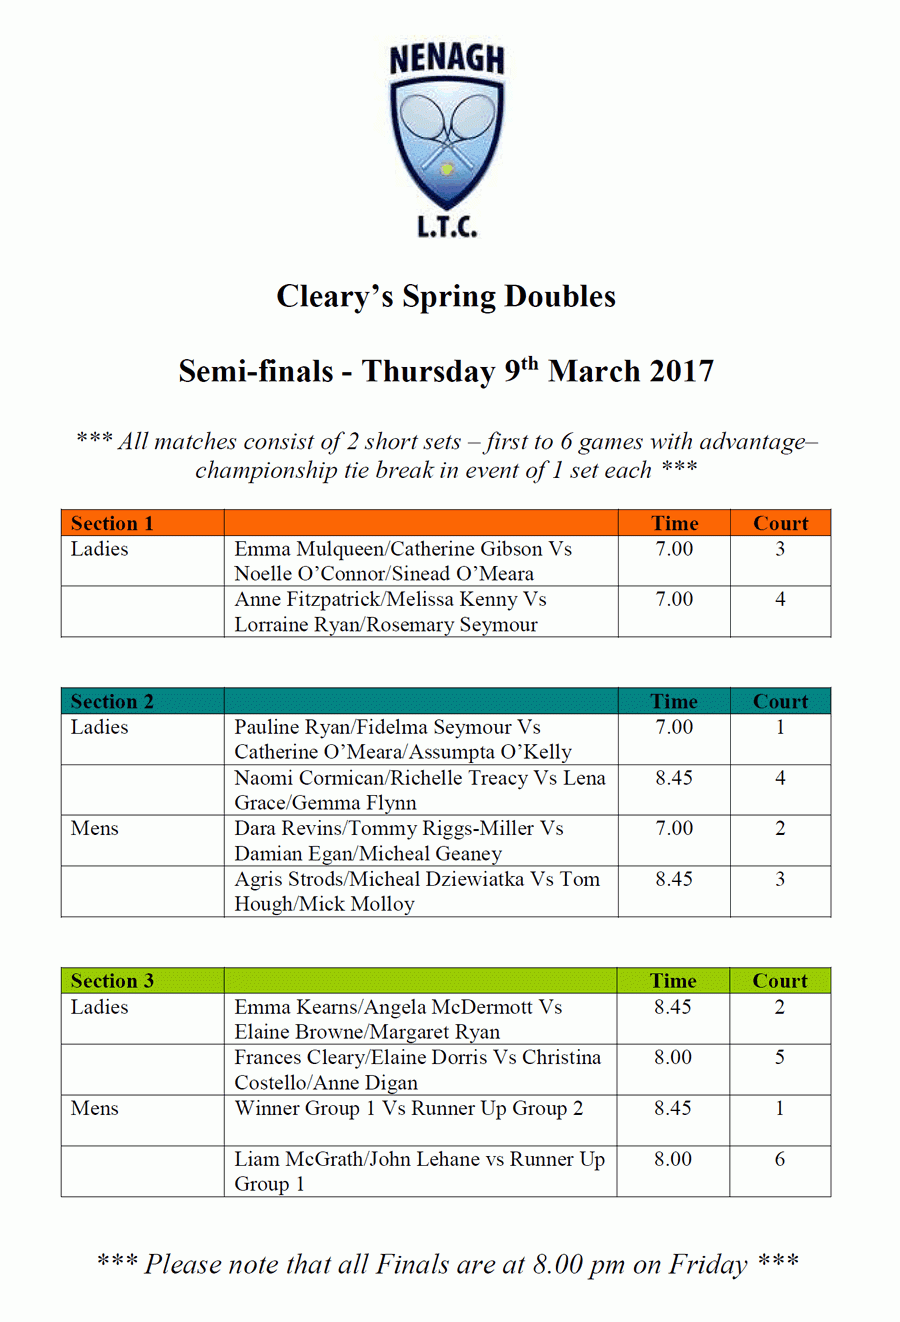 Clearys Spring Doubles Semi-Finals Schedule - Nenagh Lawn Tennis